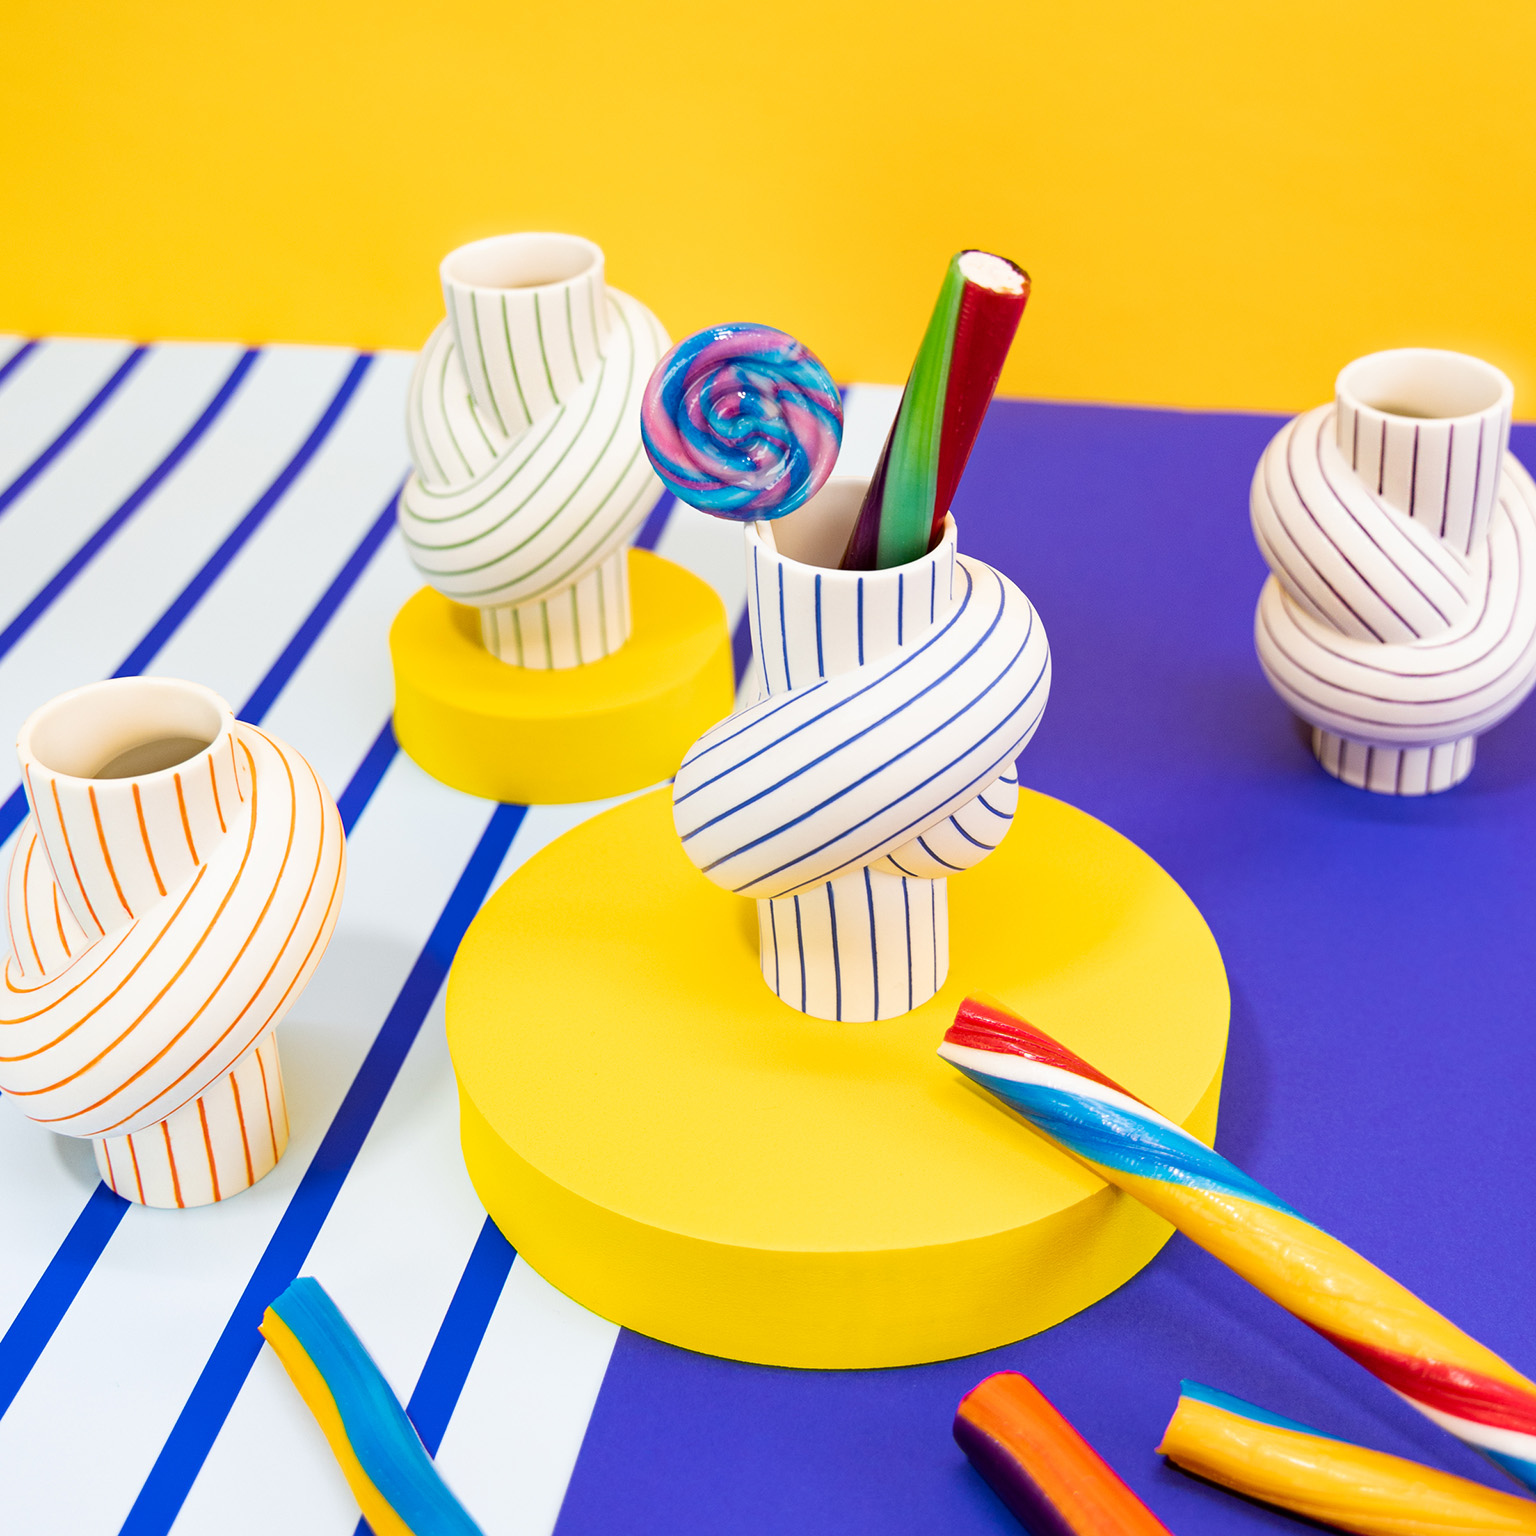 The four Node Stripes vases partly filled with lollipops and candy canes stand in front of an abstract background in yellow, white and purple.